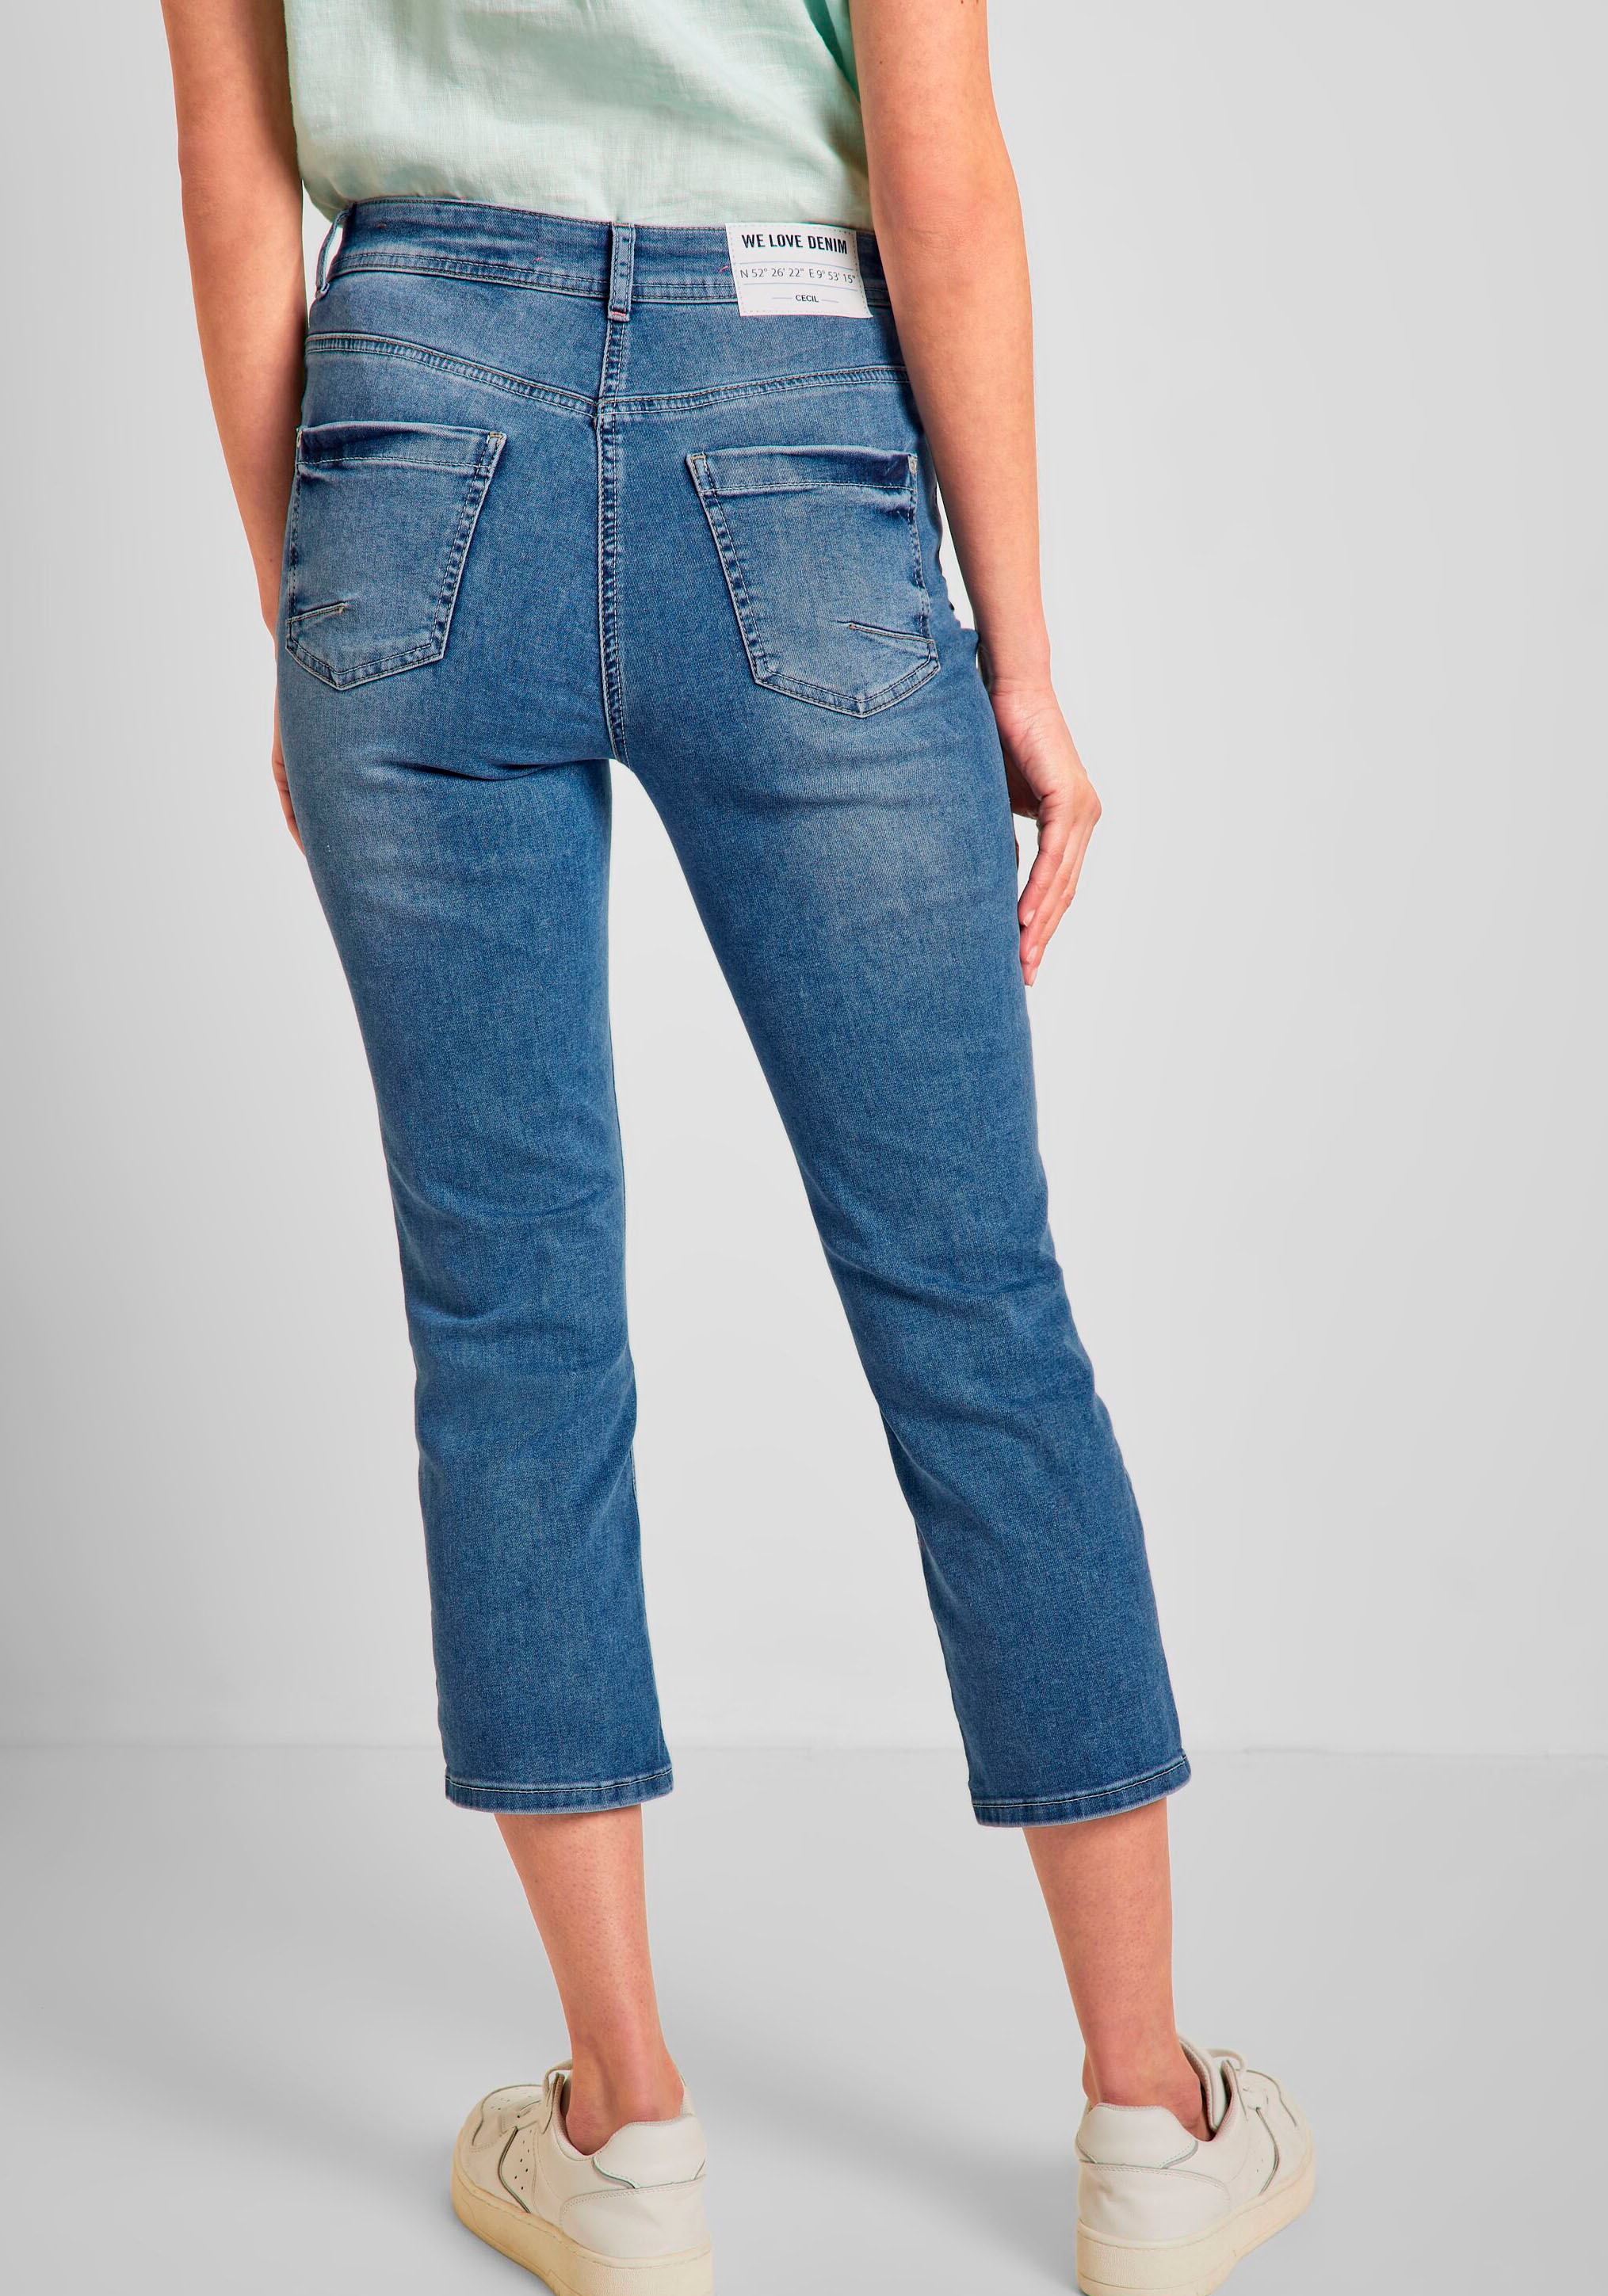 OTTO Cecil 7/8-Jeans, im 5-Pocket-Style bei